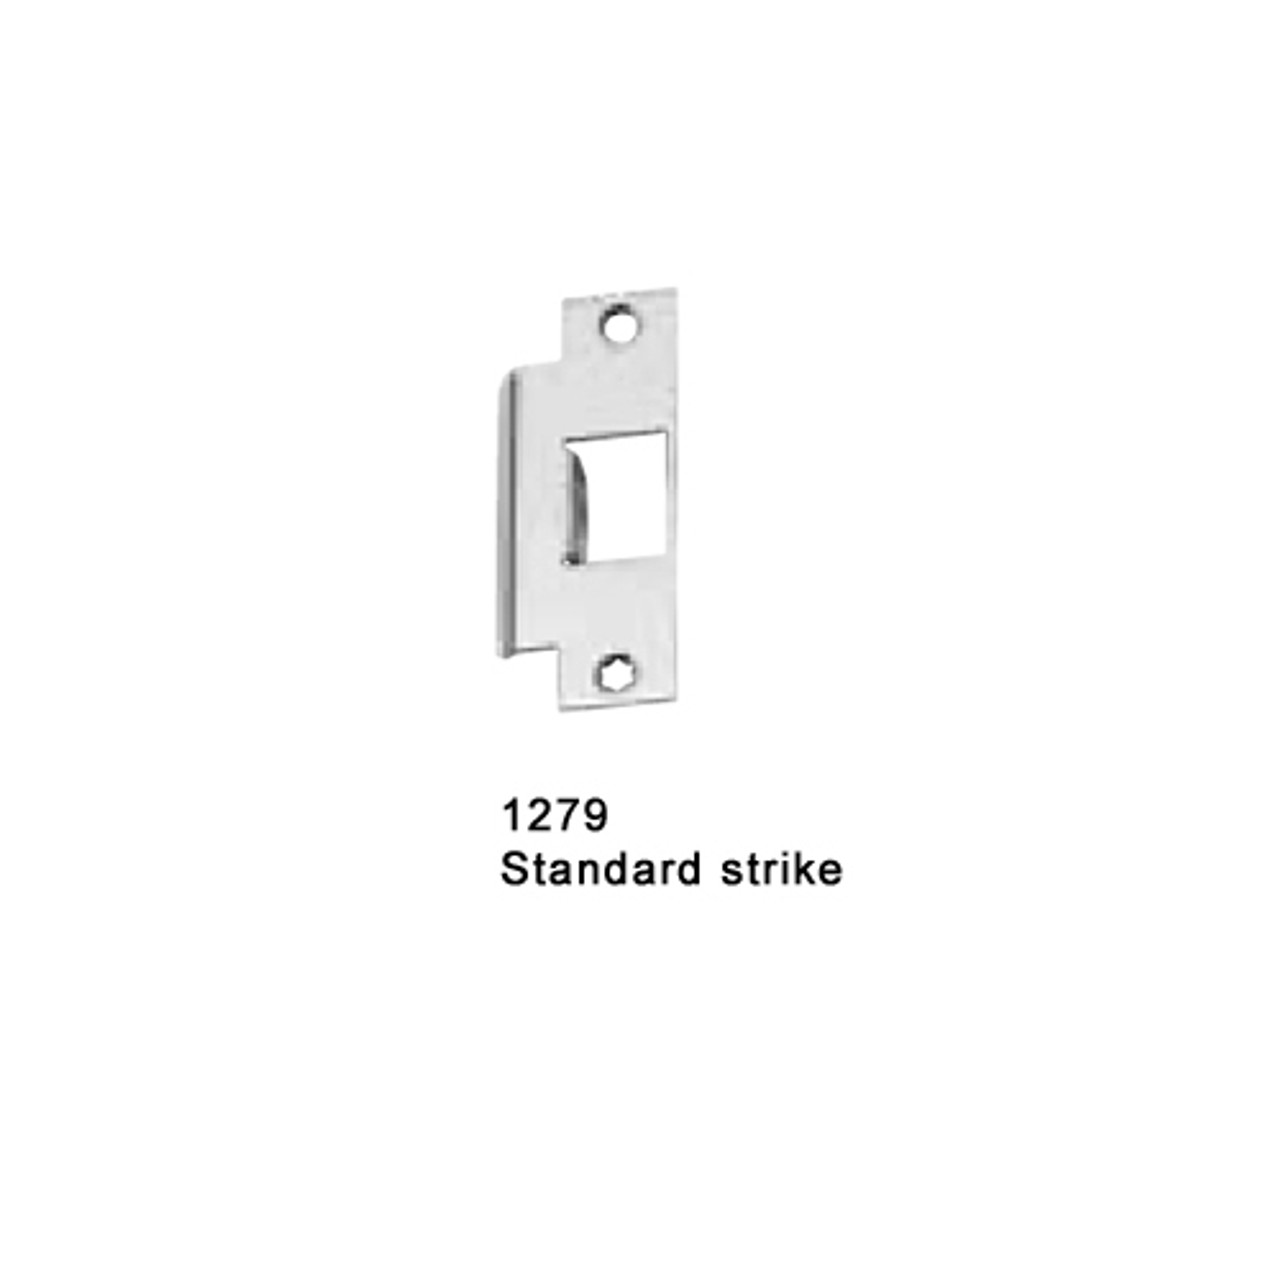 F-25-M-EO-US26-3-LHR Falcon 25 Series Fire Rated Exit Only Mortise Lock Devices in Polished Chrome